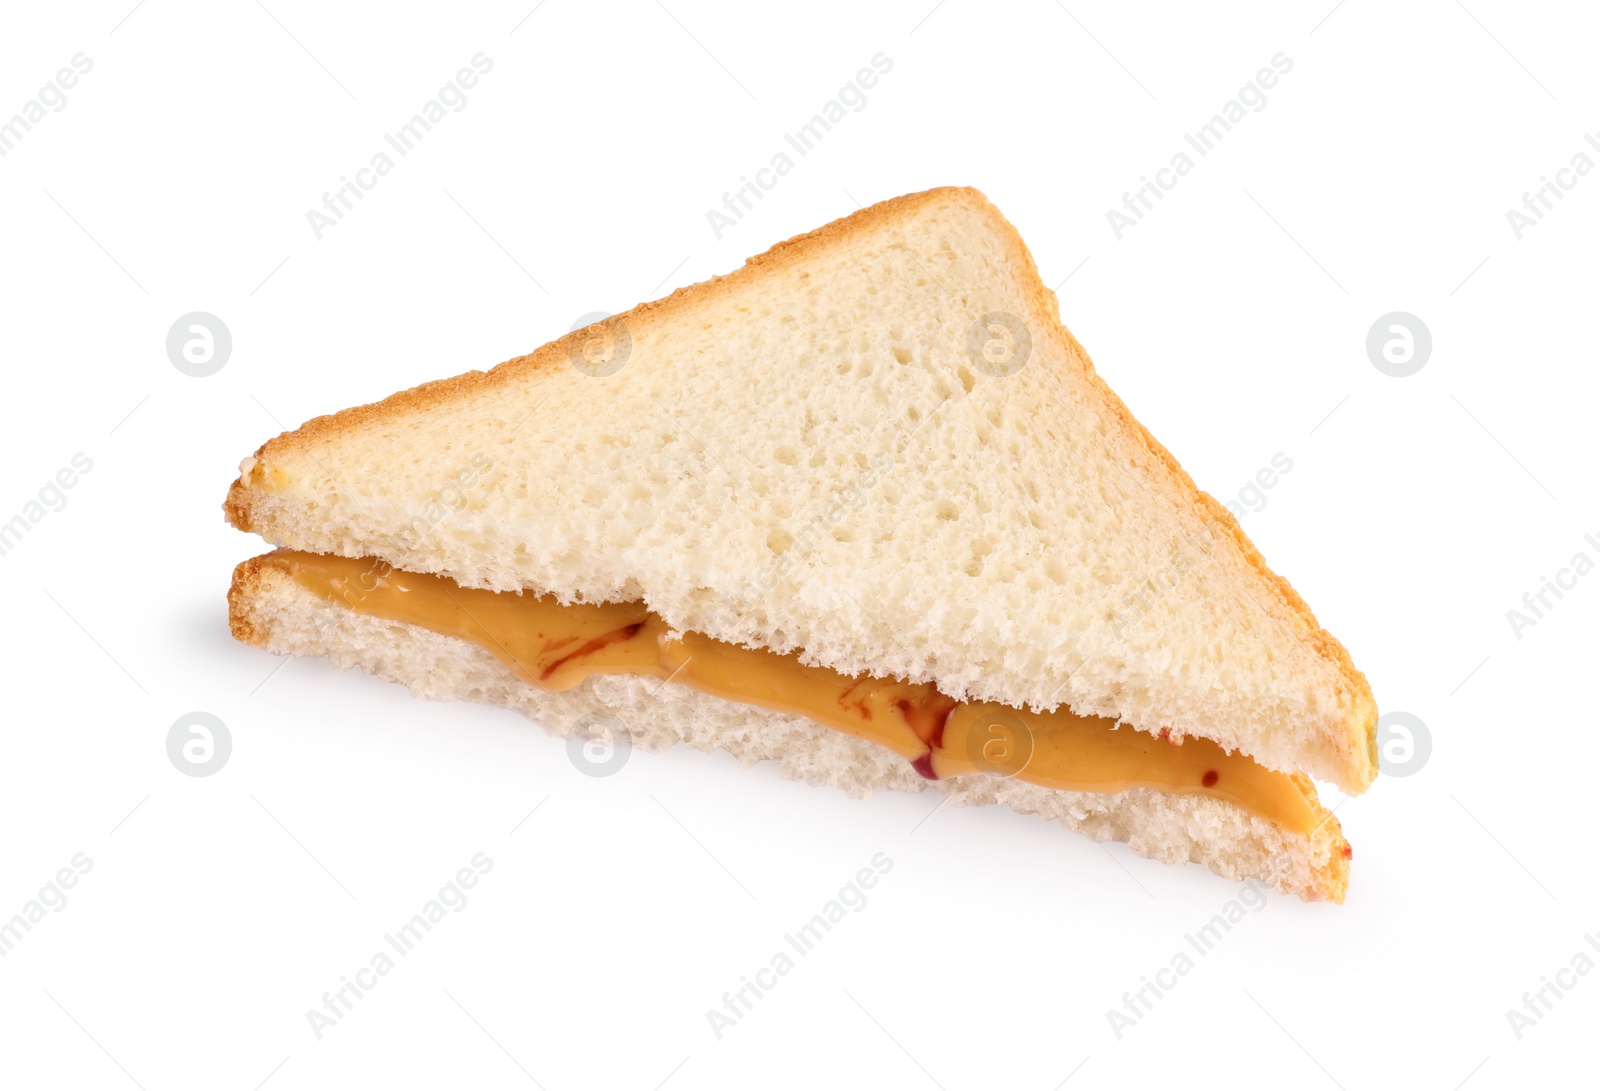 Photo of Sandwich with tasty nut butter isolated on white